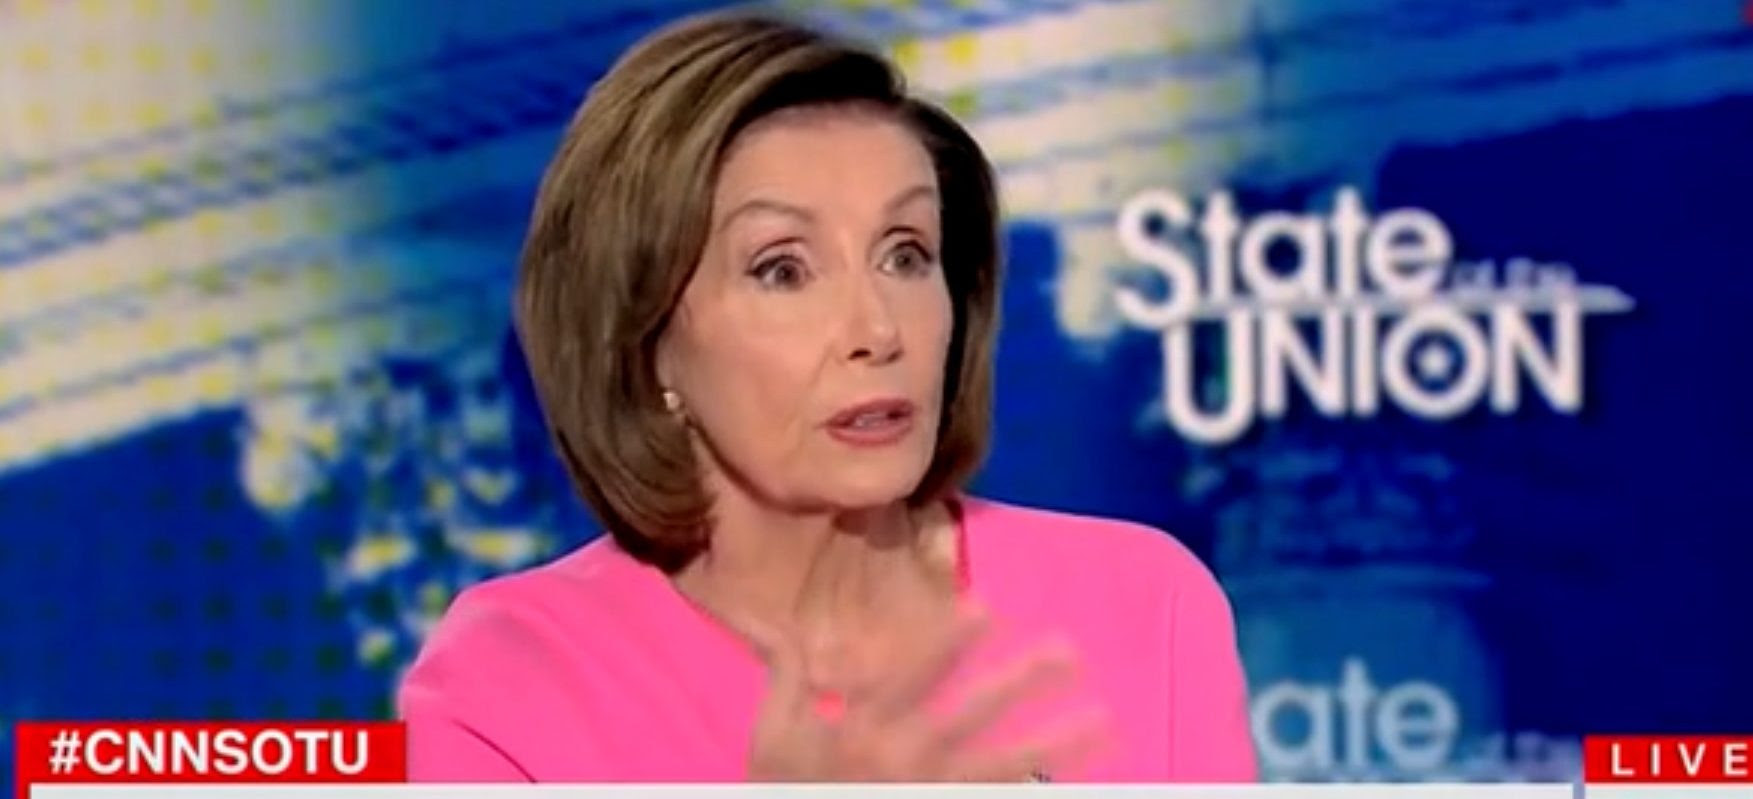 ‘Why Would I Tell You That Now?’: Pelosi Balks At Question About Plans To Run For Re-Election